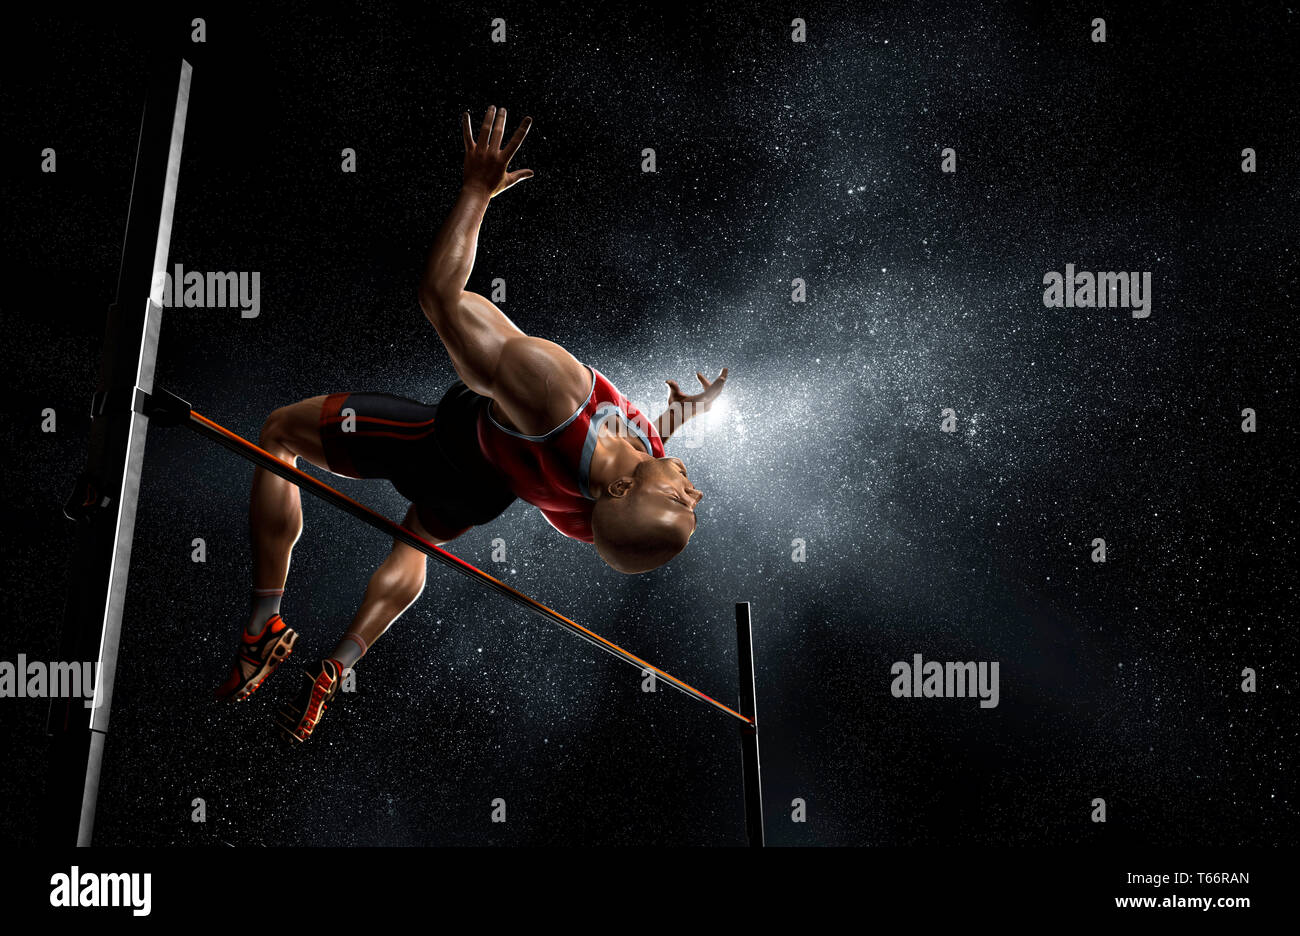 Male track and field athlete high jumping Stock Photo